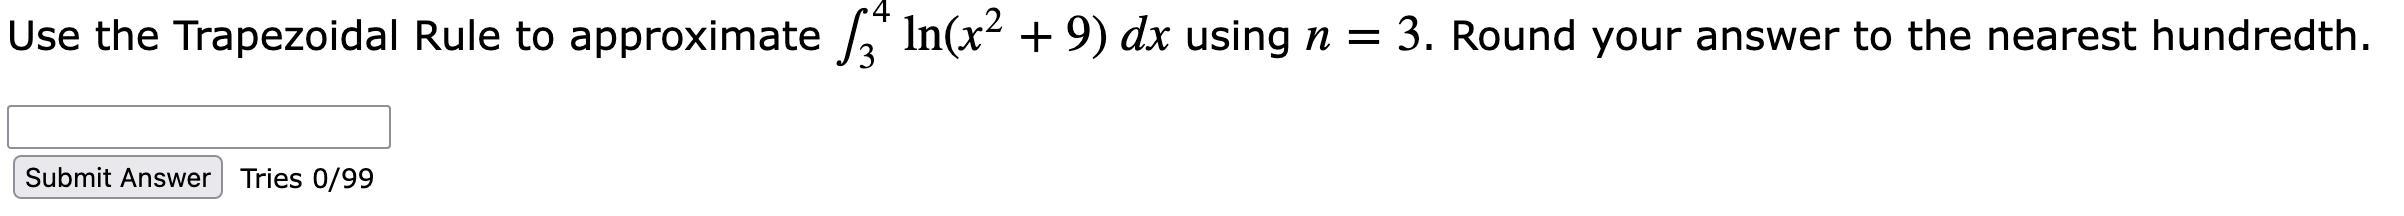 Use The Trapezoidal Rule To Approximate 43ln(x2+9) Dx Using N=3. Round Your Answer To The Nearest Hundredth.